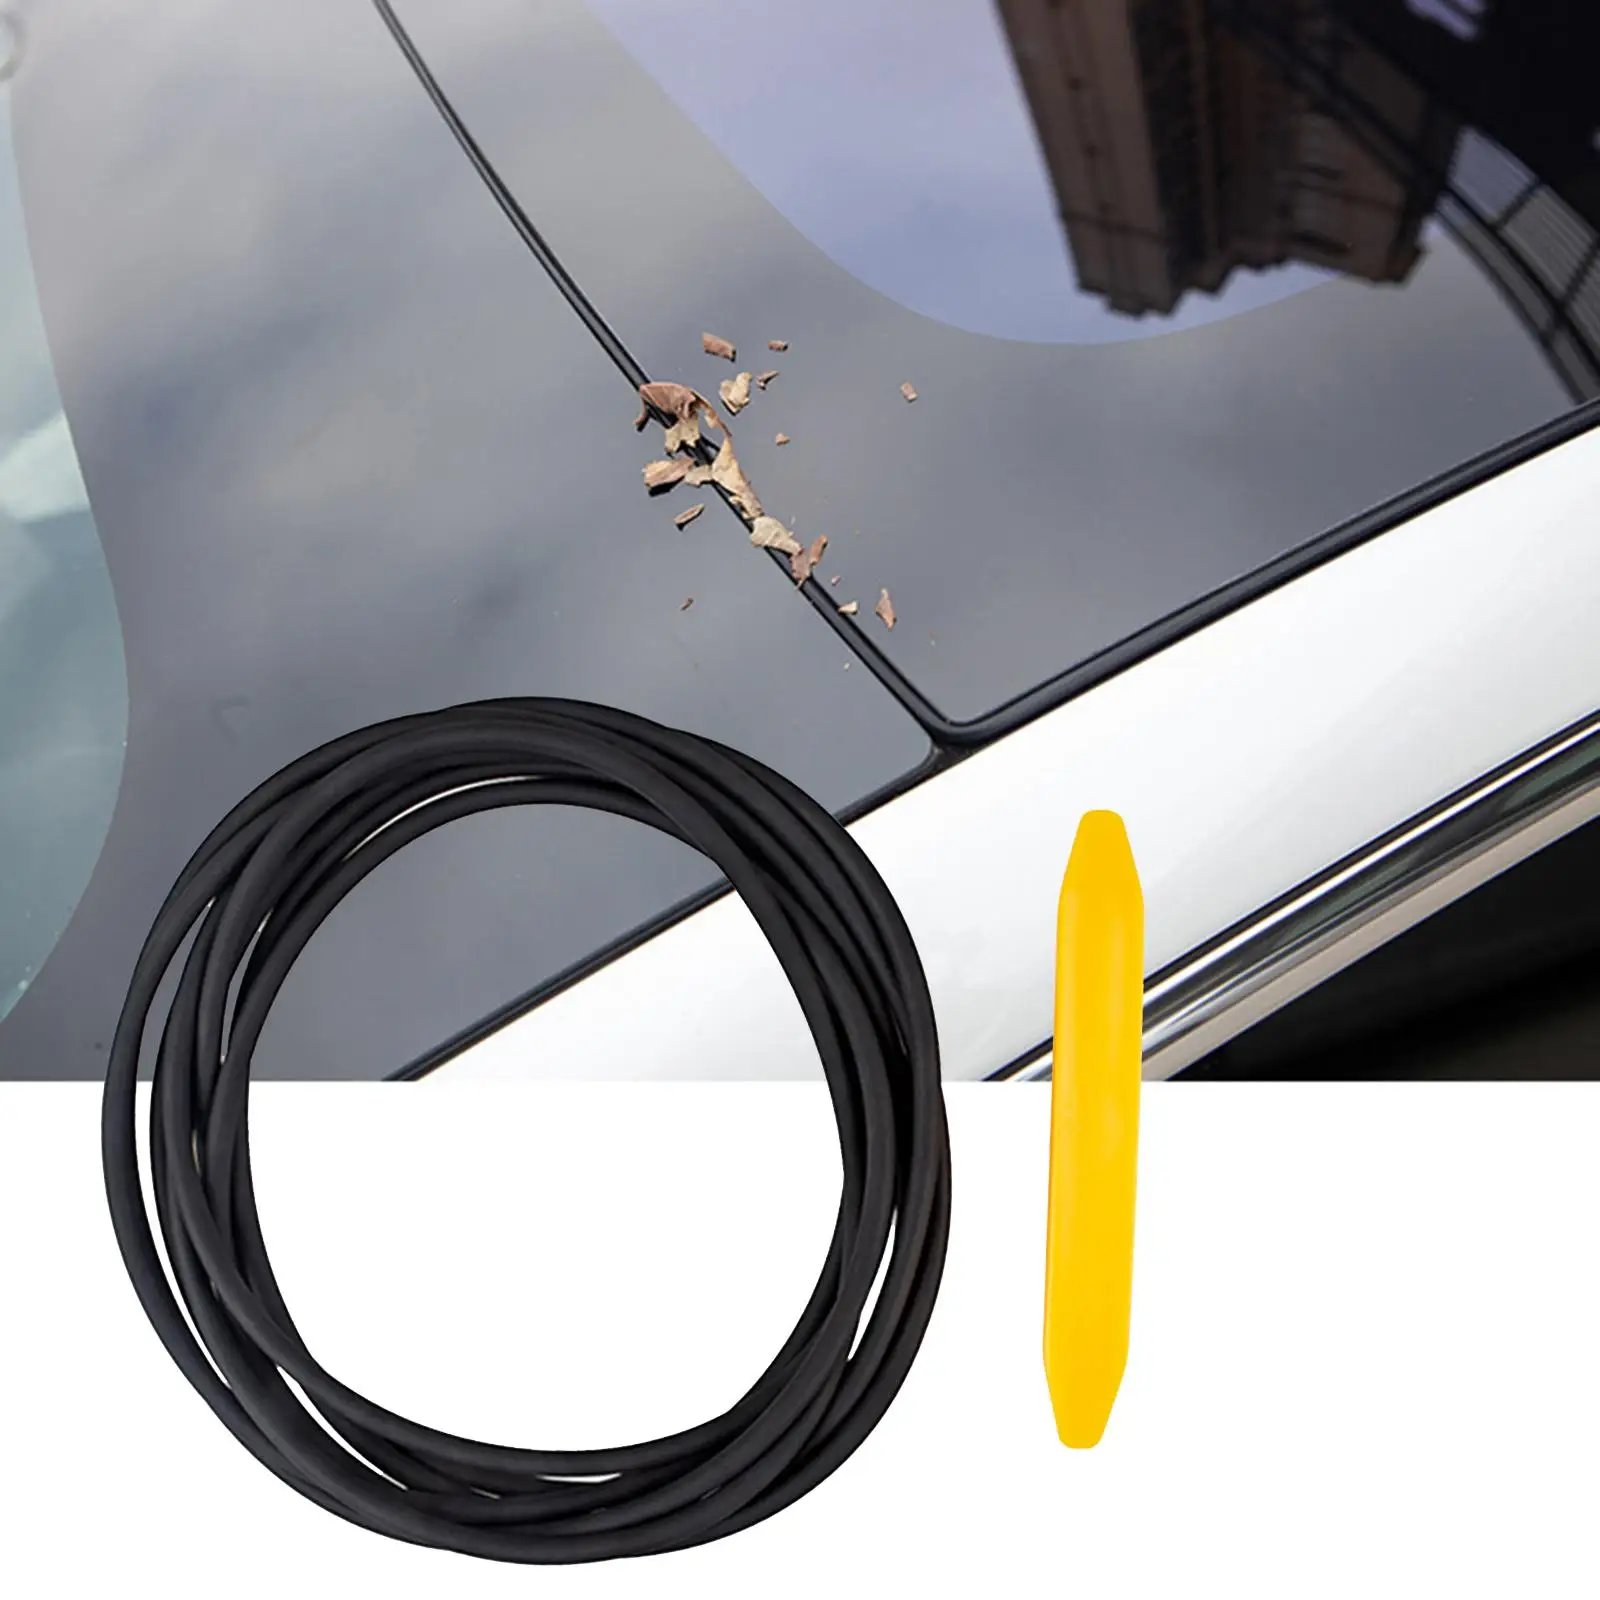 Silicone Sunroof Seal Strip Trim Cover Automotive Parts Noise Reduction Roof Wind Guard